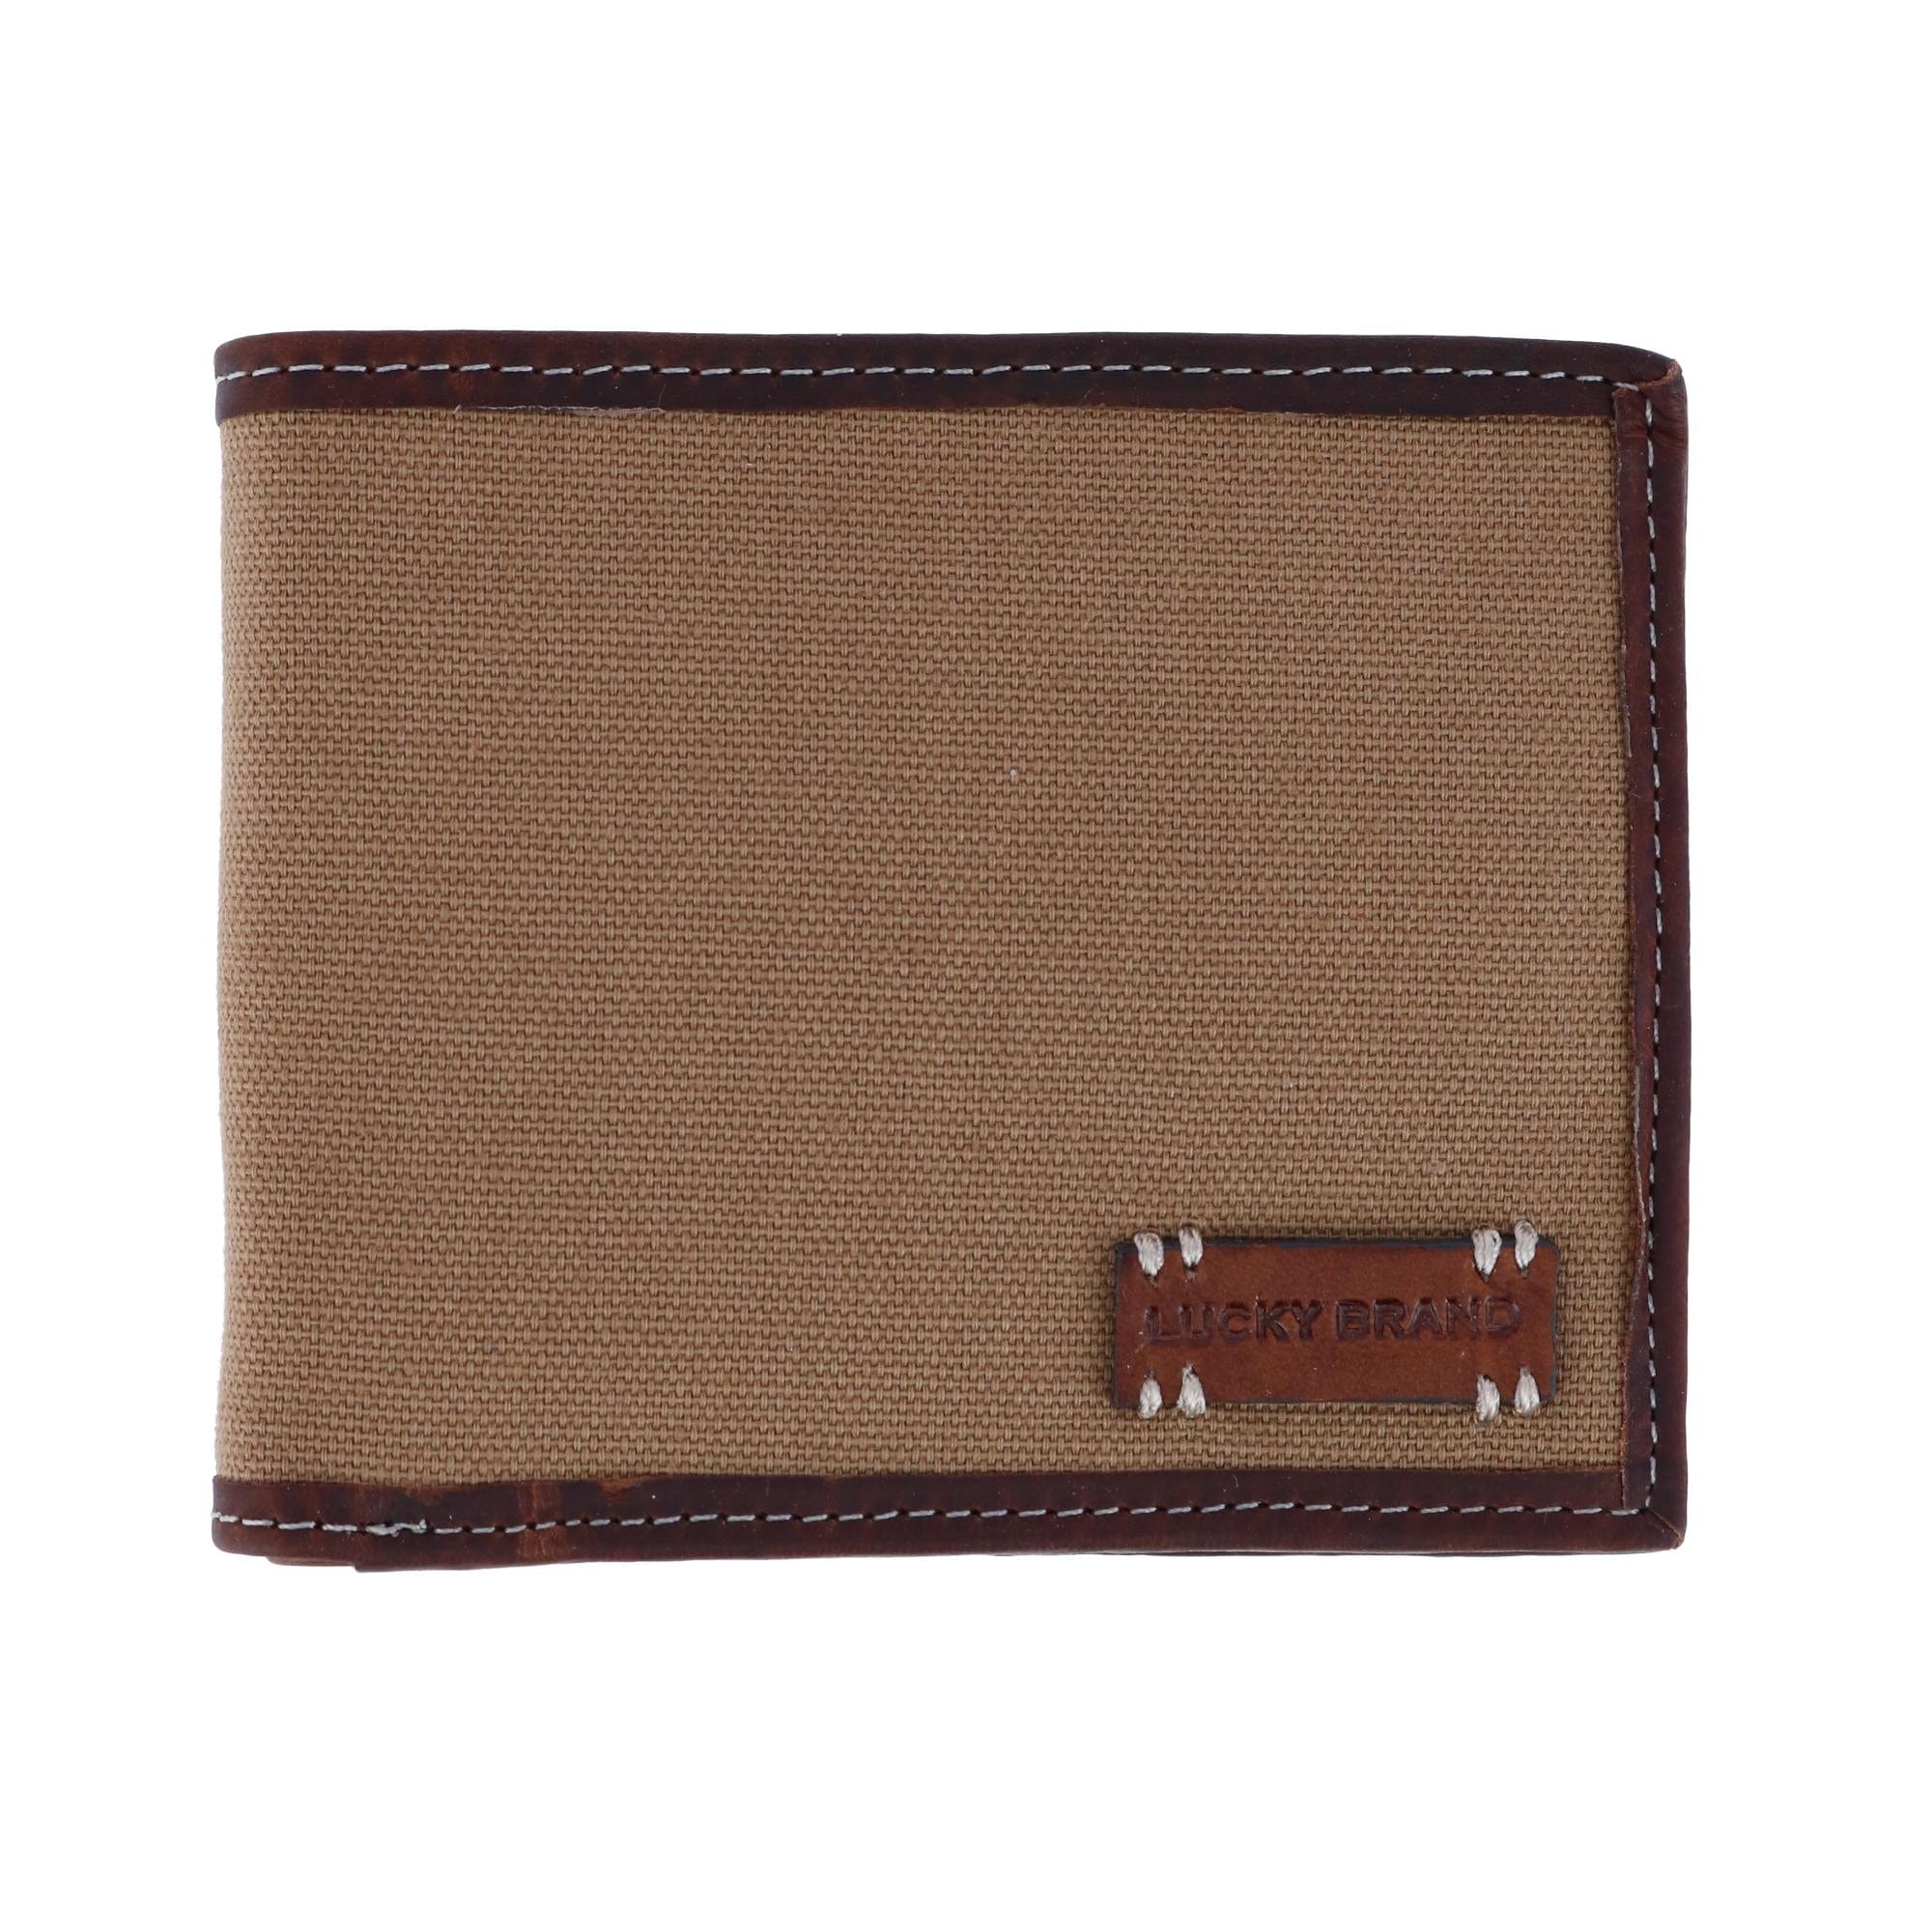 Stitch & Hide Christina Classic Wallet Maple | On Sale | Love Luggage